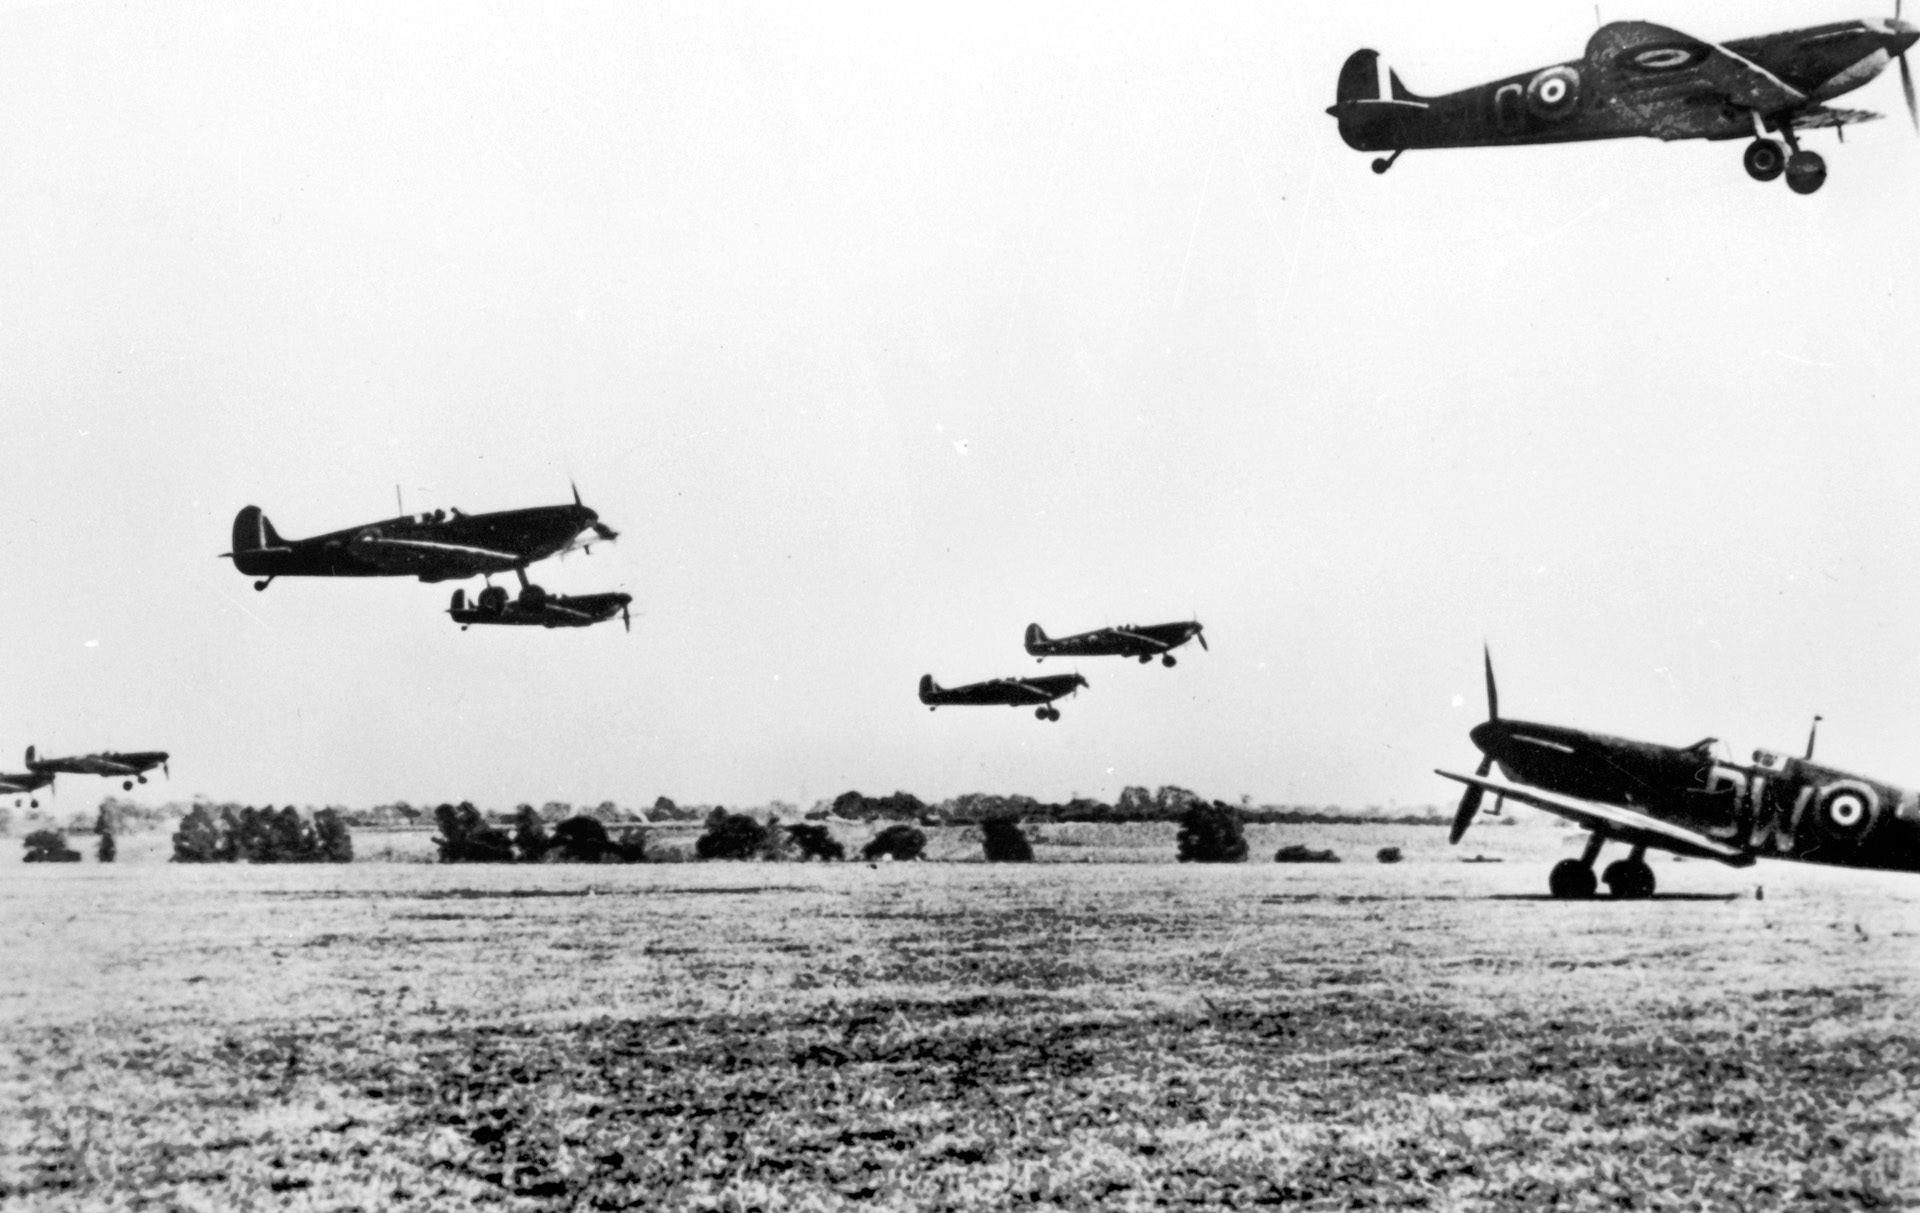 A squadron of Supermarine Spitfires scrambles into the sky after receiving an alert of approaching enemy aircraft. Many RAF fields were unpaved fields of grass, like this one.